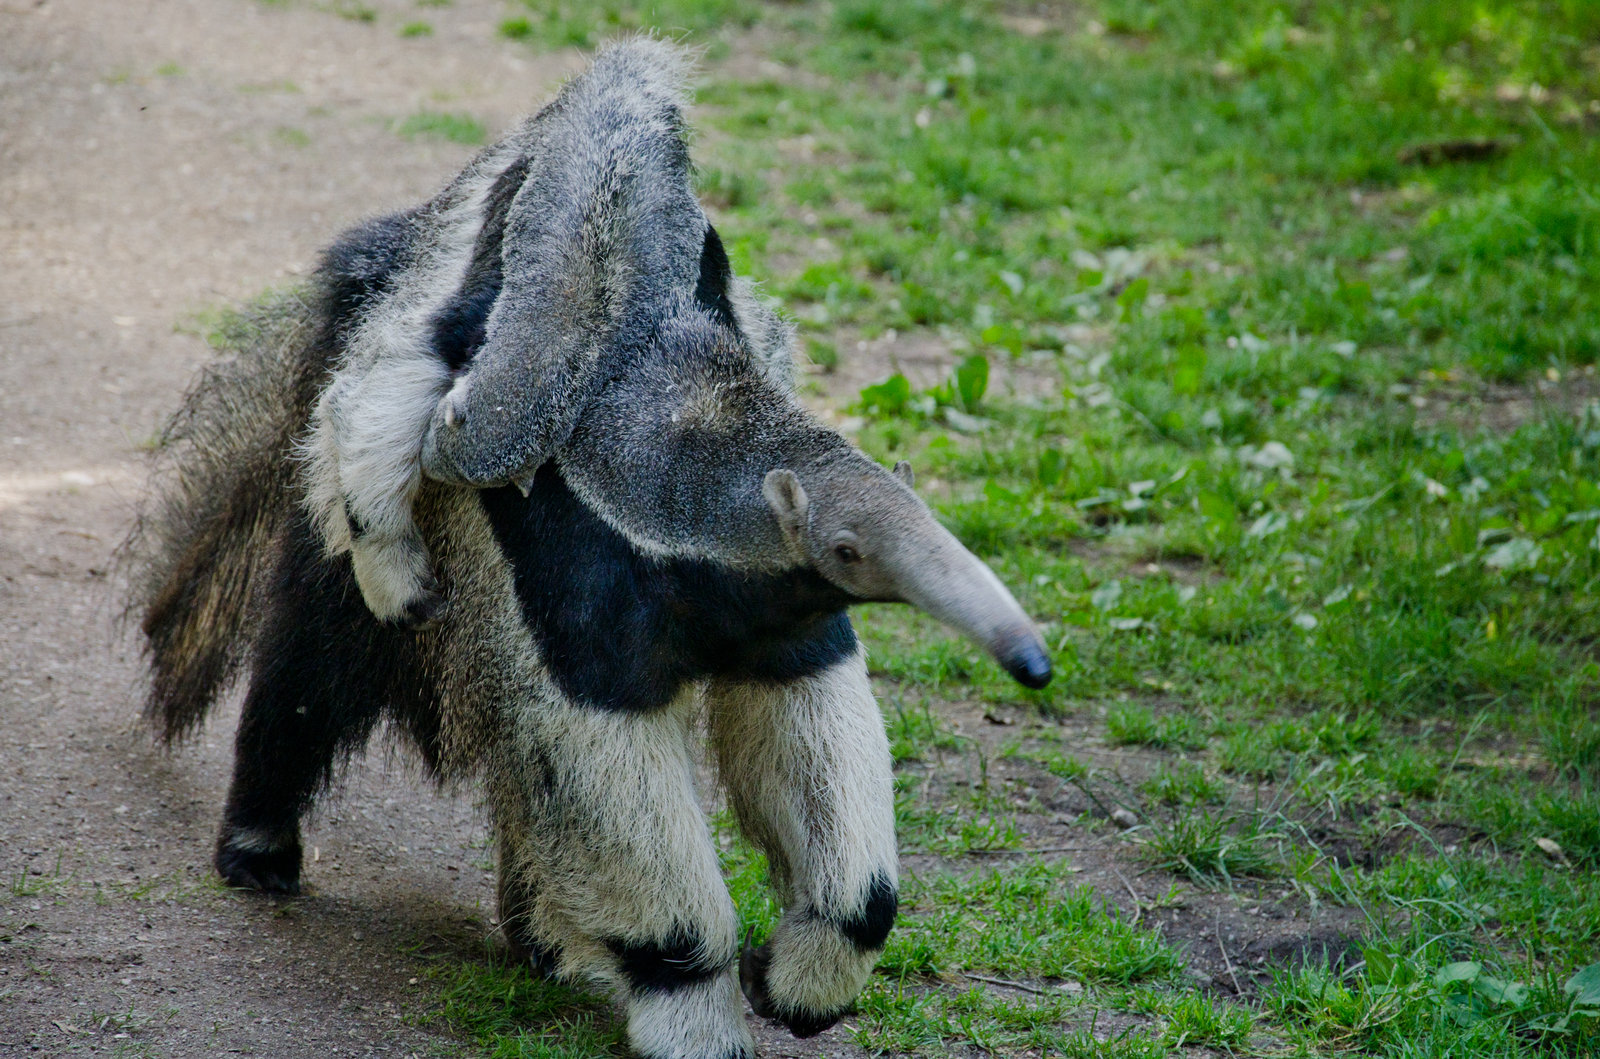 Giant Anteater Baby By Leoric777